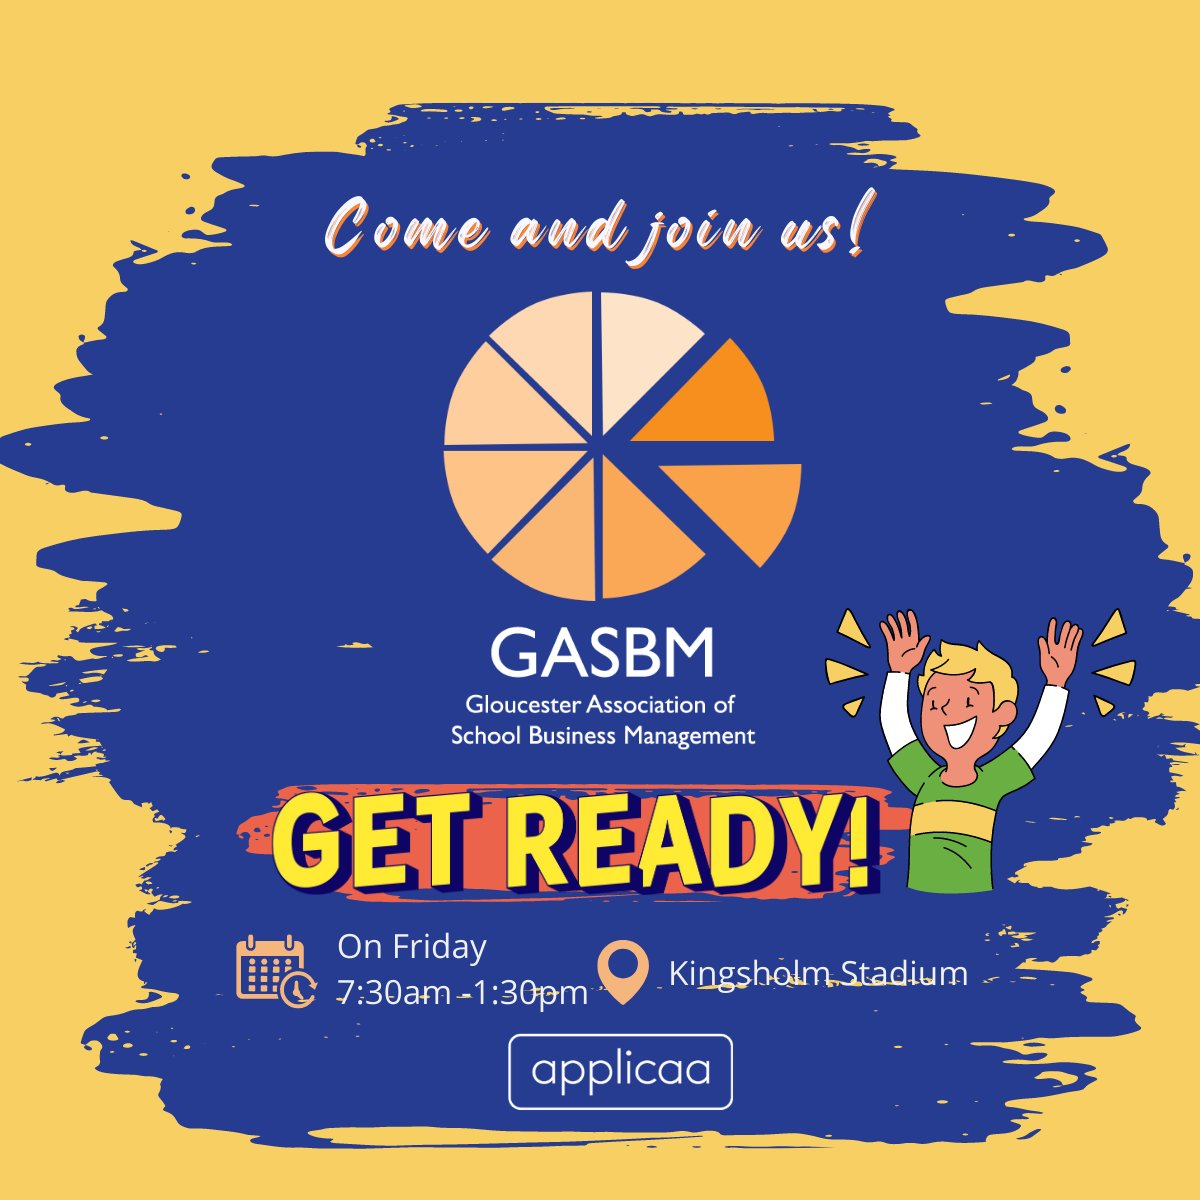 Looking forward to the GASBM event at Kingsholm Stadium this Friday and to meeting lots of school business managers and sharing the benefits of Applicaa for streamlining school admin processes. 

#Applicaa #Gloucester #schoolbusinessmanager #schools #admissions